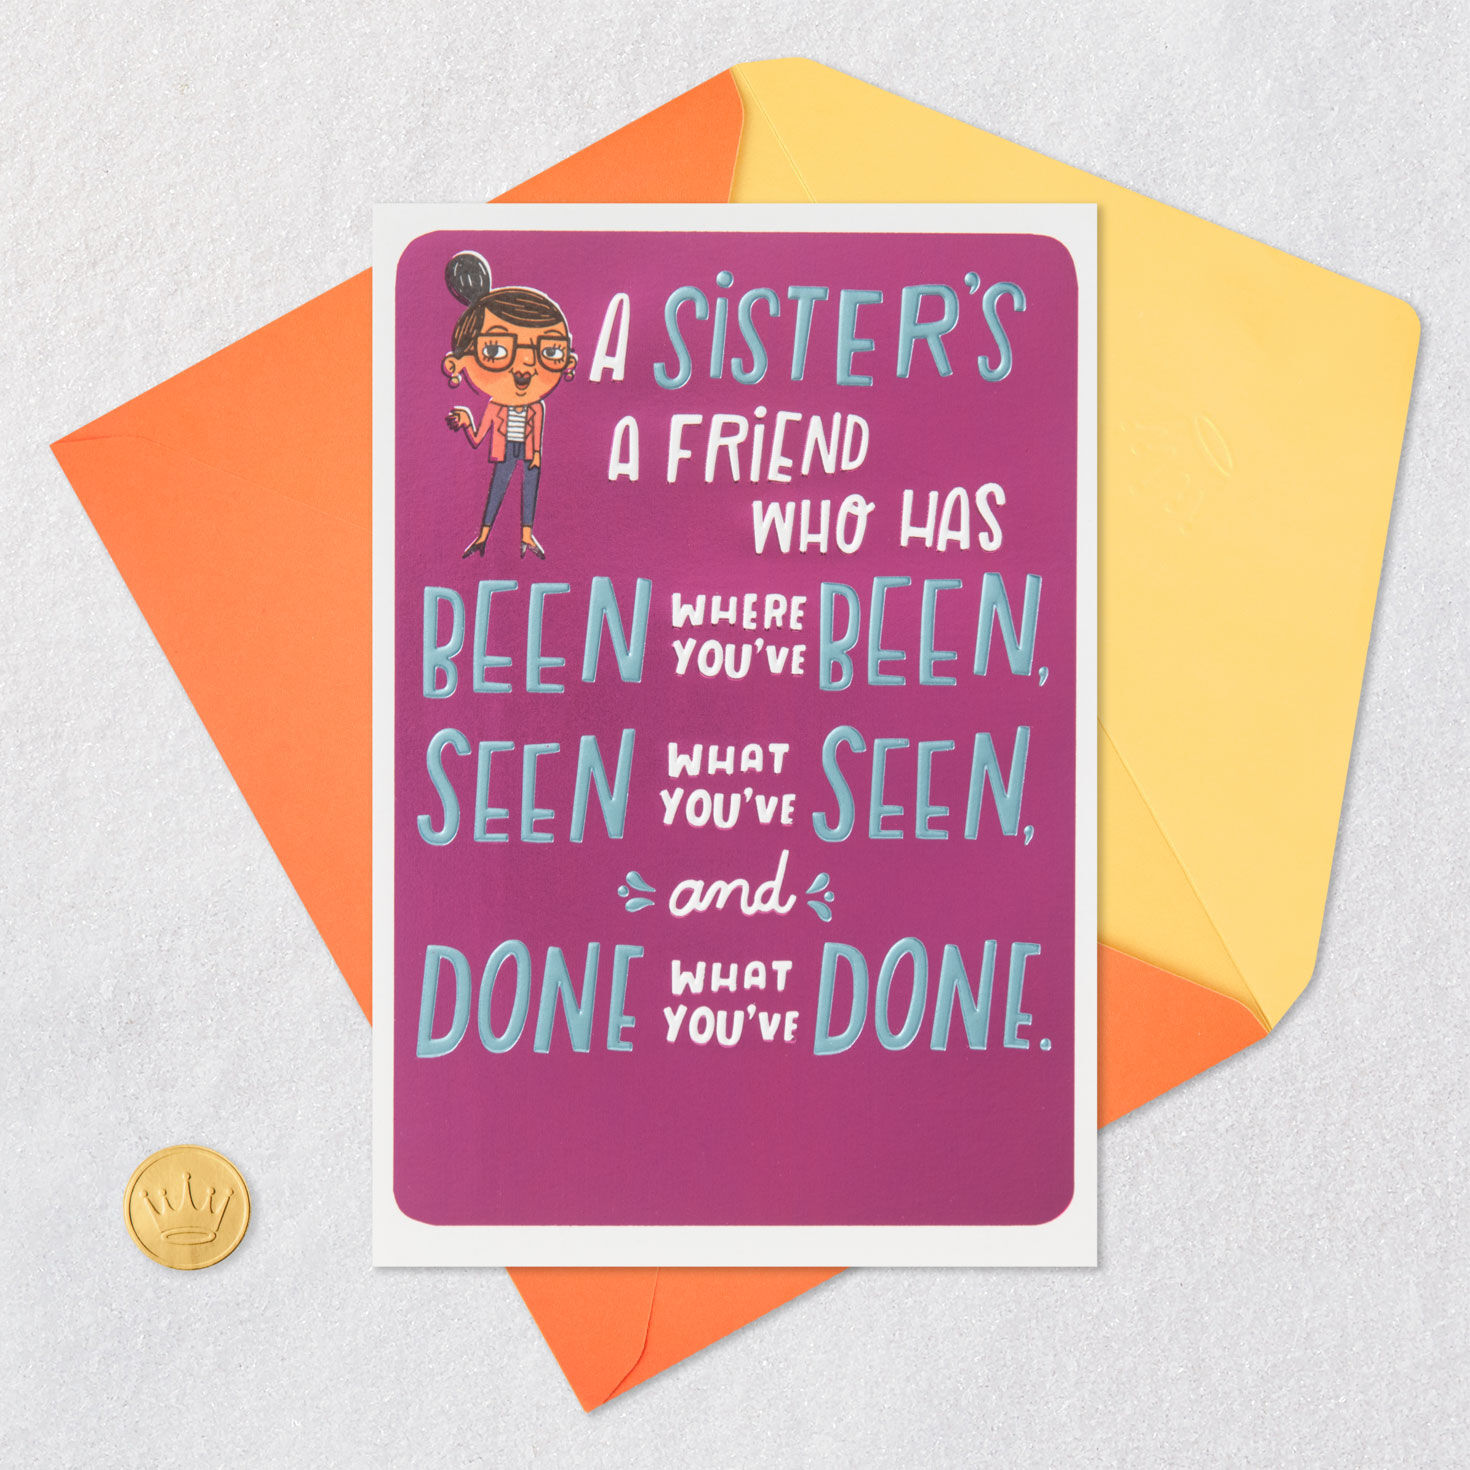 A Sister's a Friend… Funny Birthday Card for only USD 3.99 | Hallmark